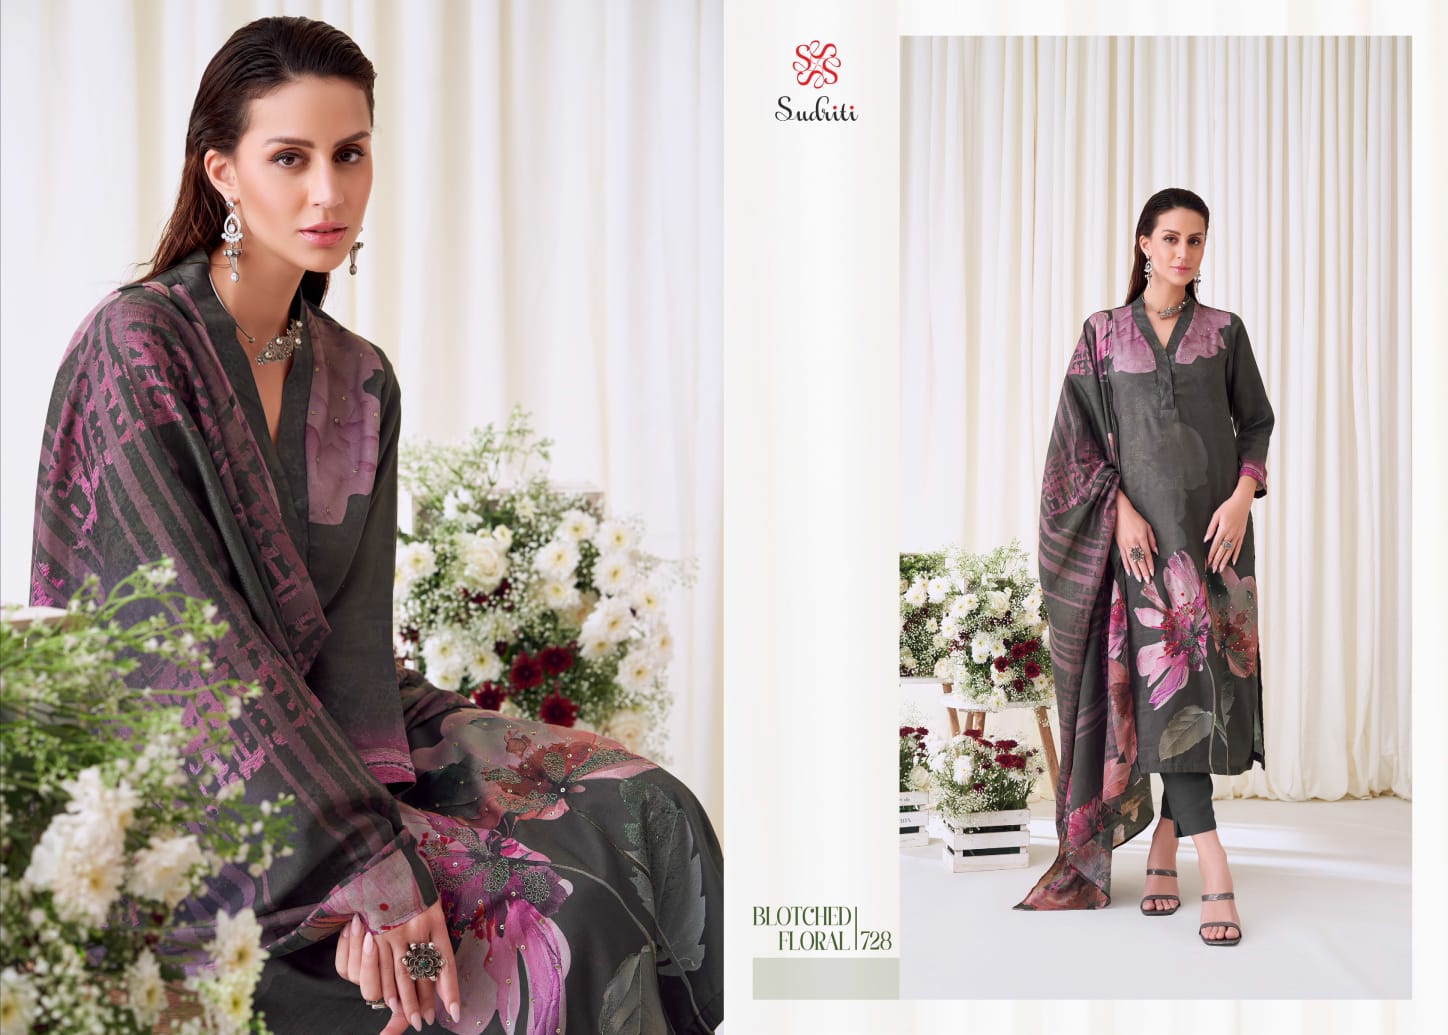 Sudriti Blotched Floral collection 8